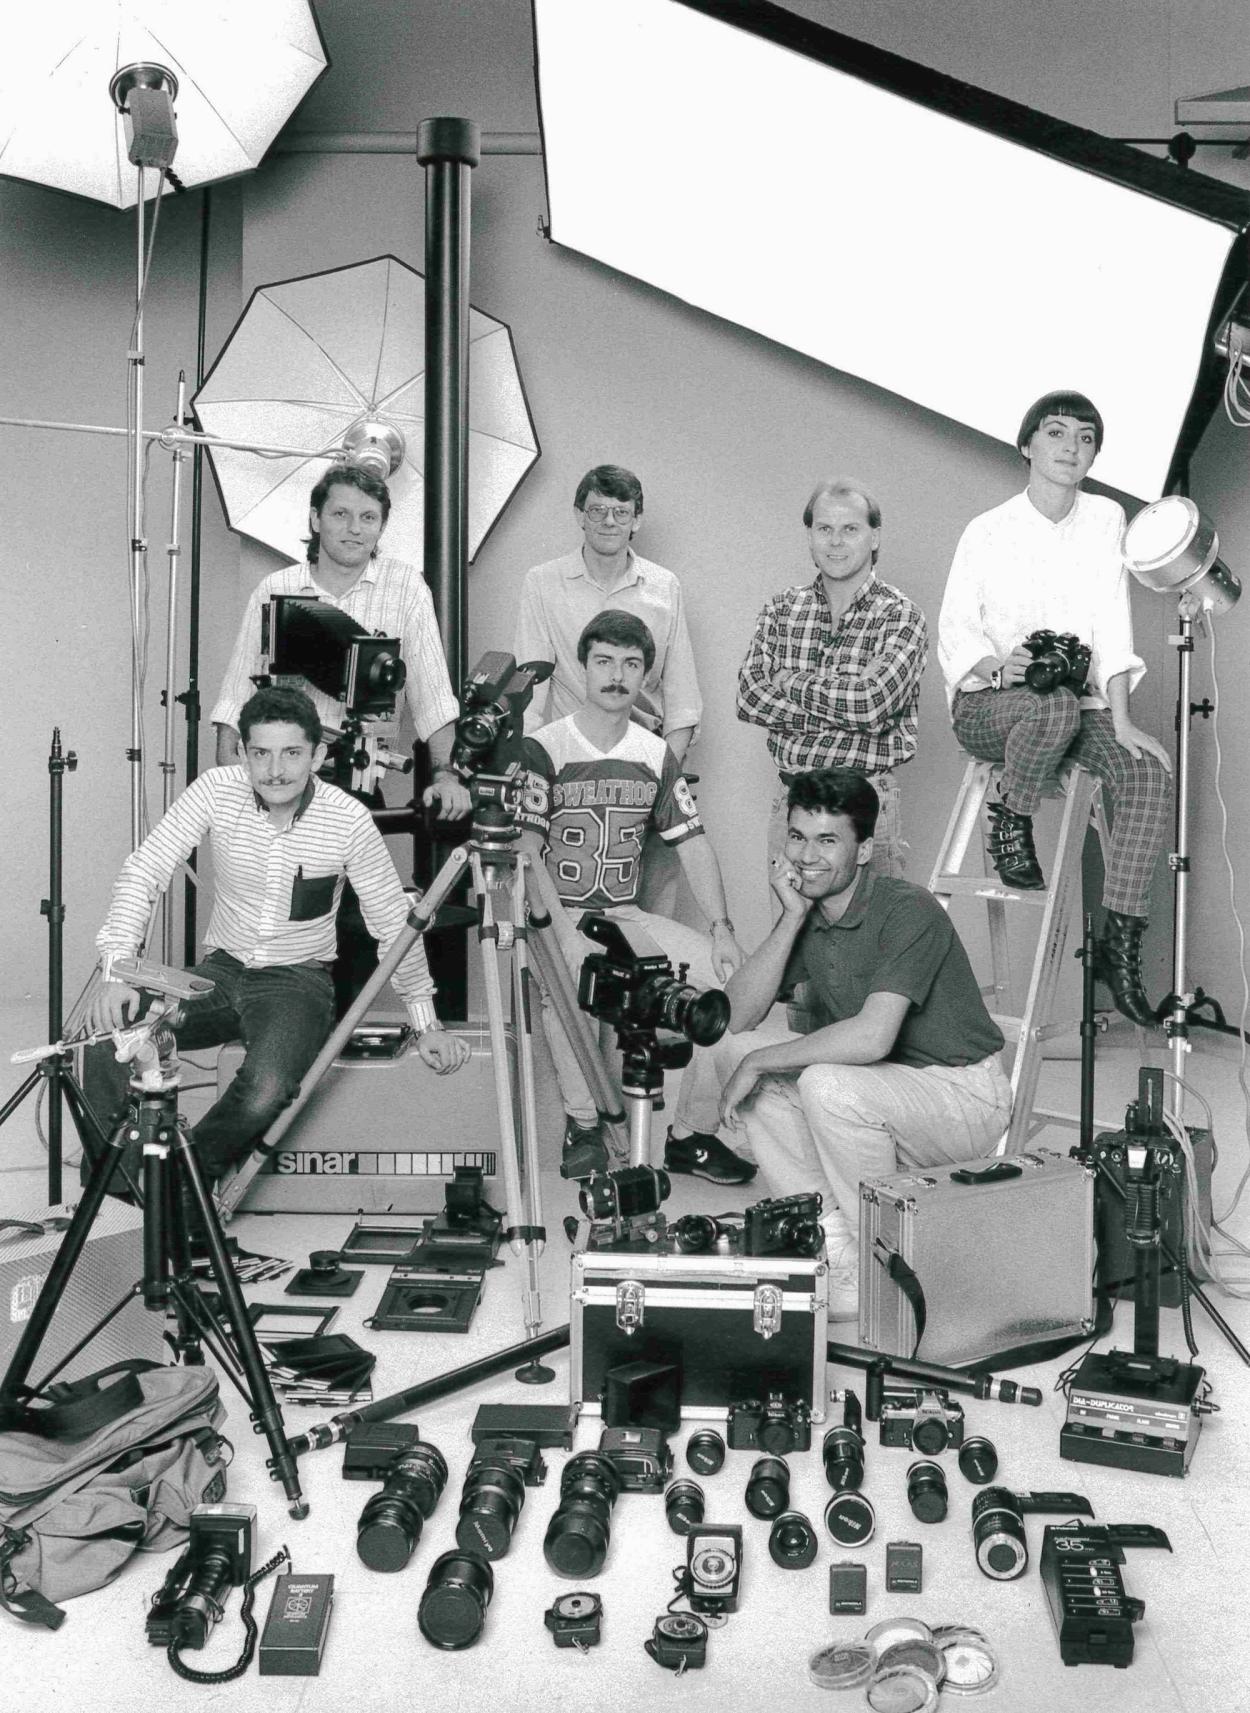 Black and white image of a photography team in a studio